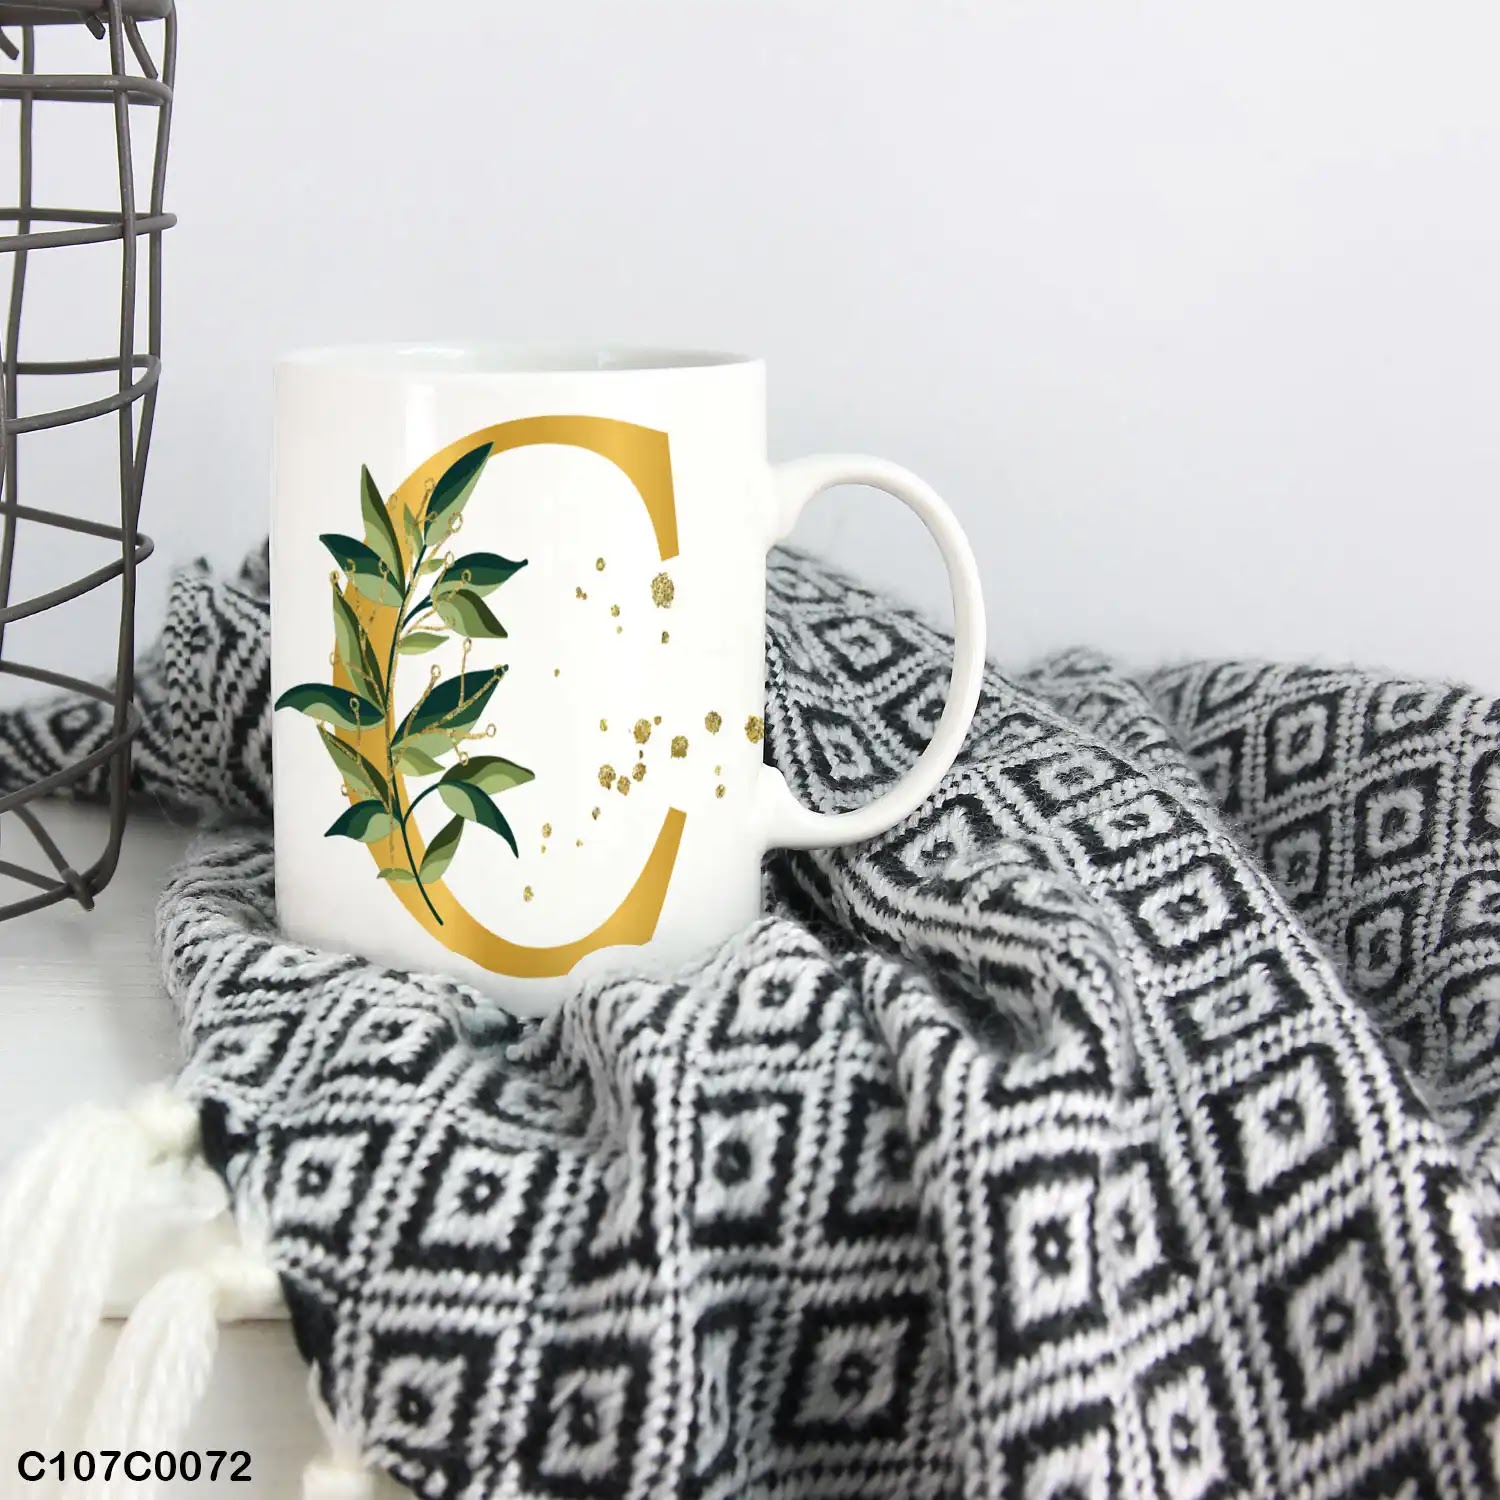 A white mug (cup) printed with gold Letter "C" and small green branch